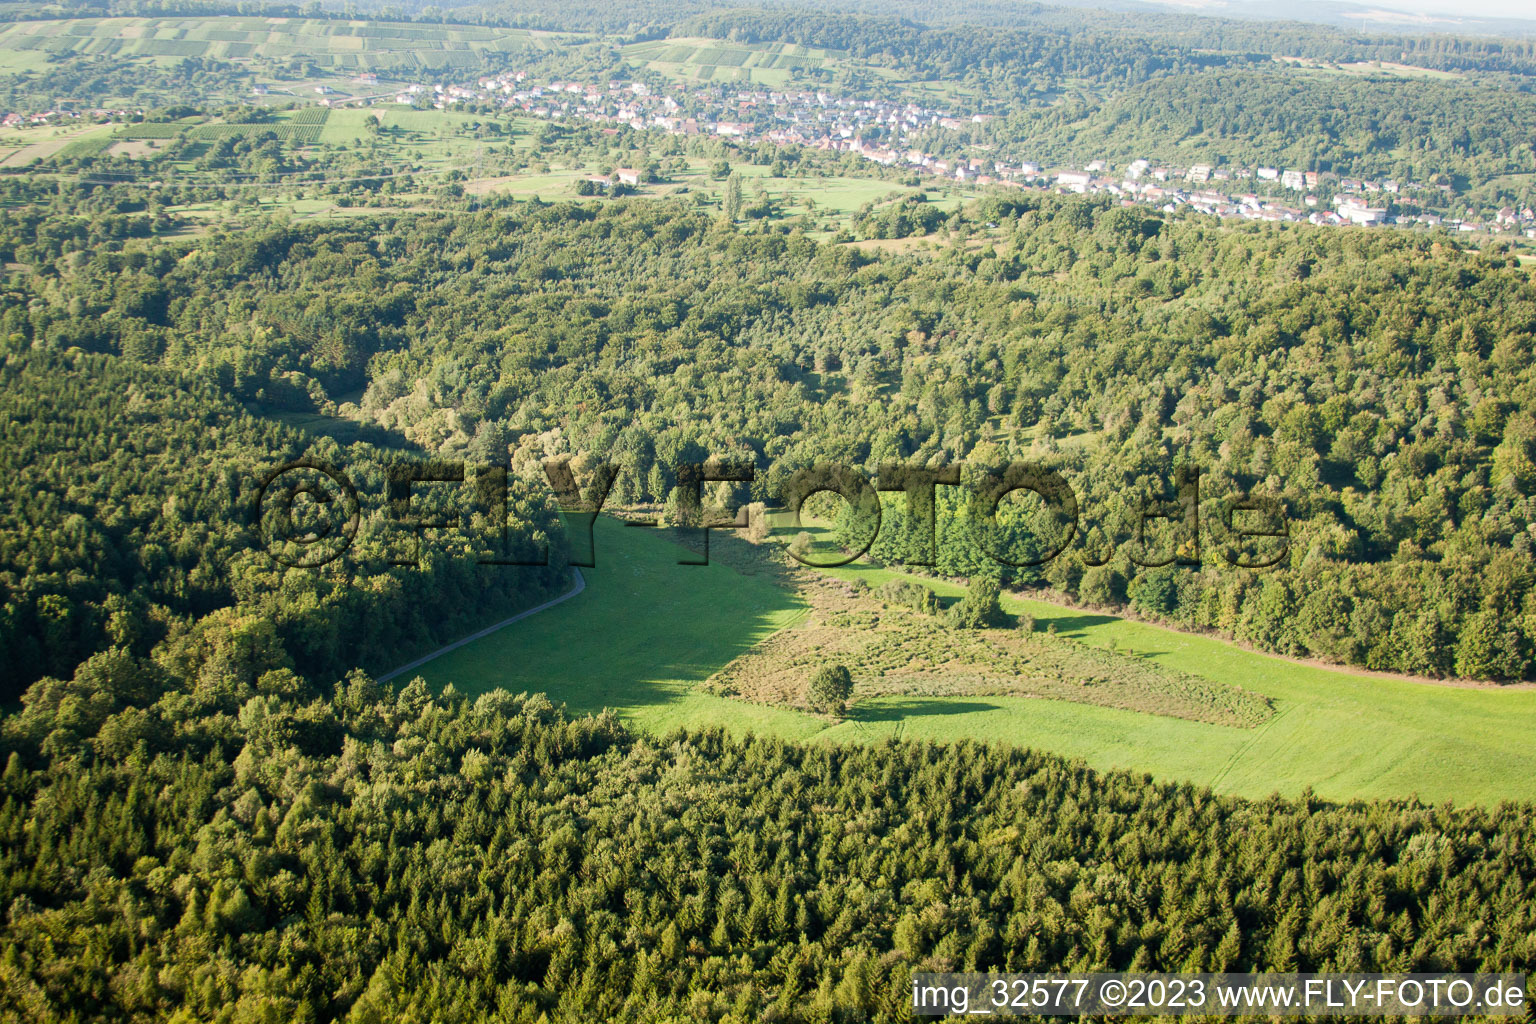 Kettelbachtal nature reserve in Gräfenhausen in the state Baden-Wuerttemberg, Germany from the drone perspective